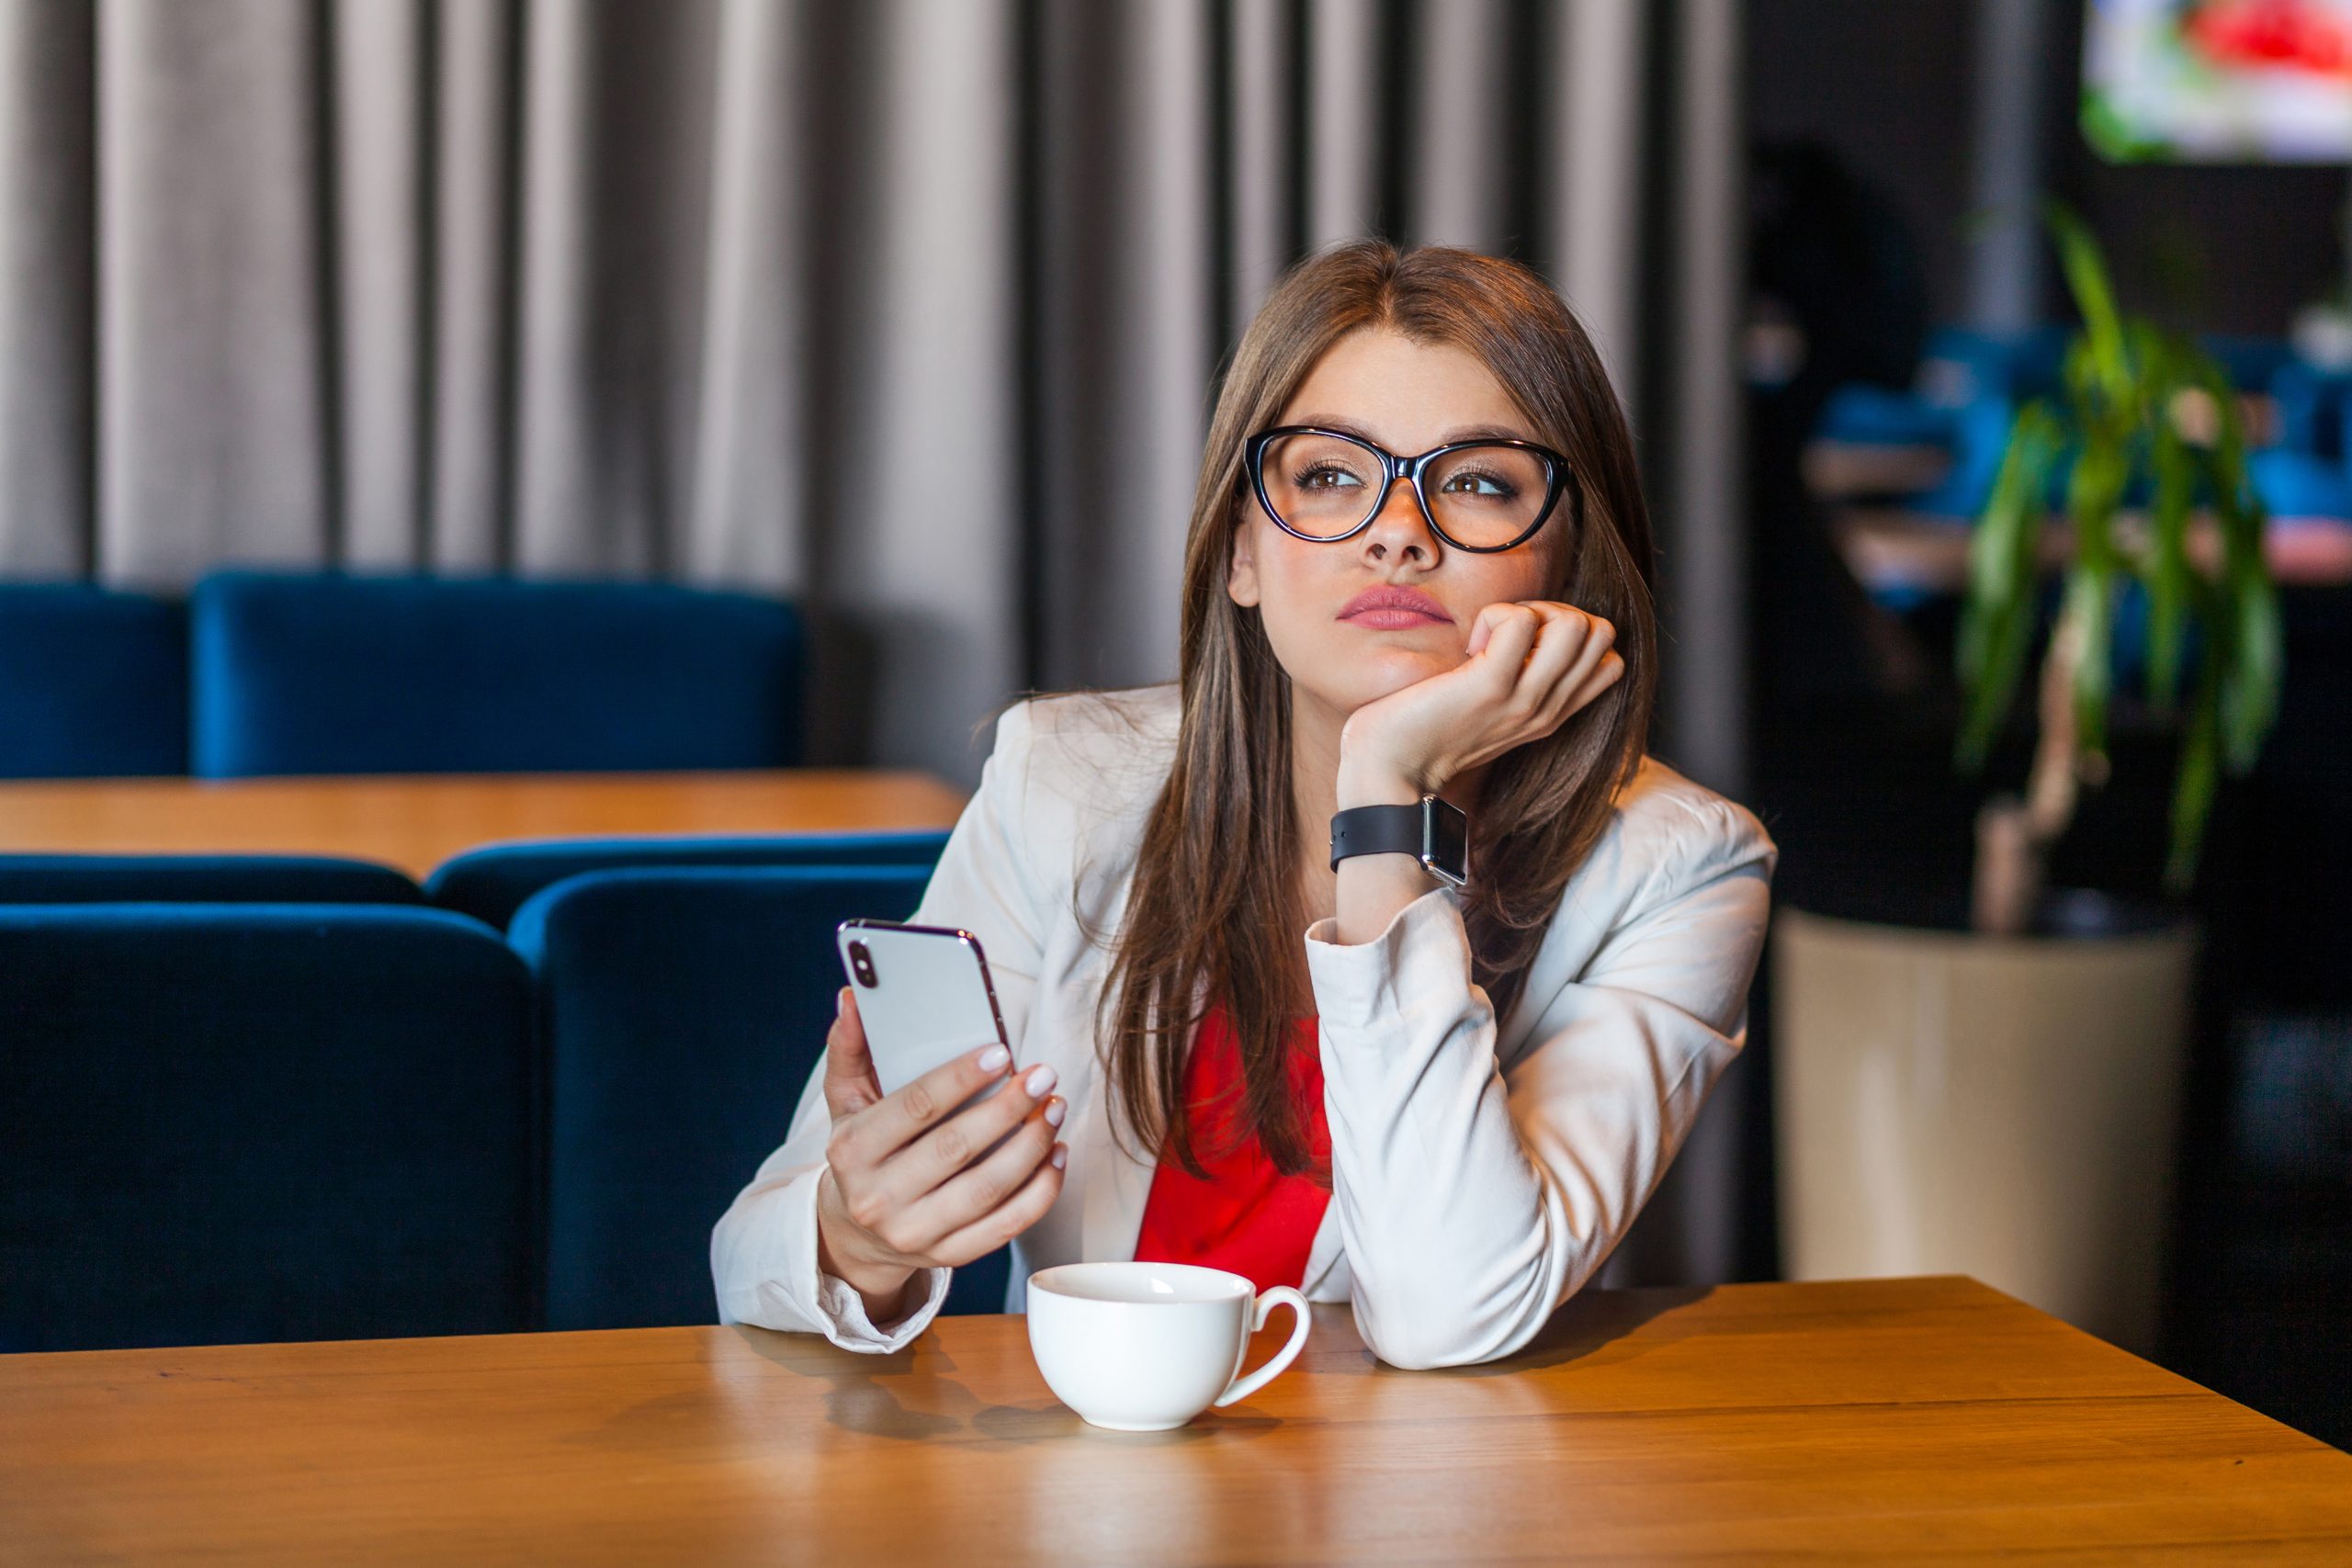 Young woman student or business person with glasses and a mobile phone thinking